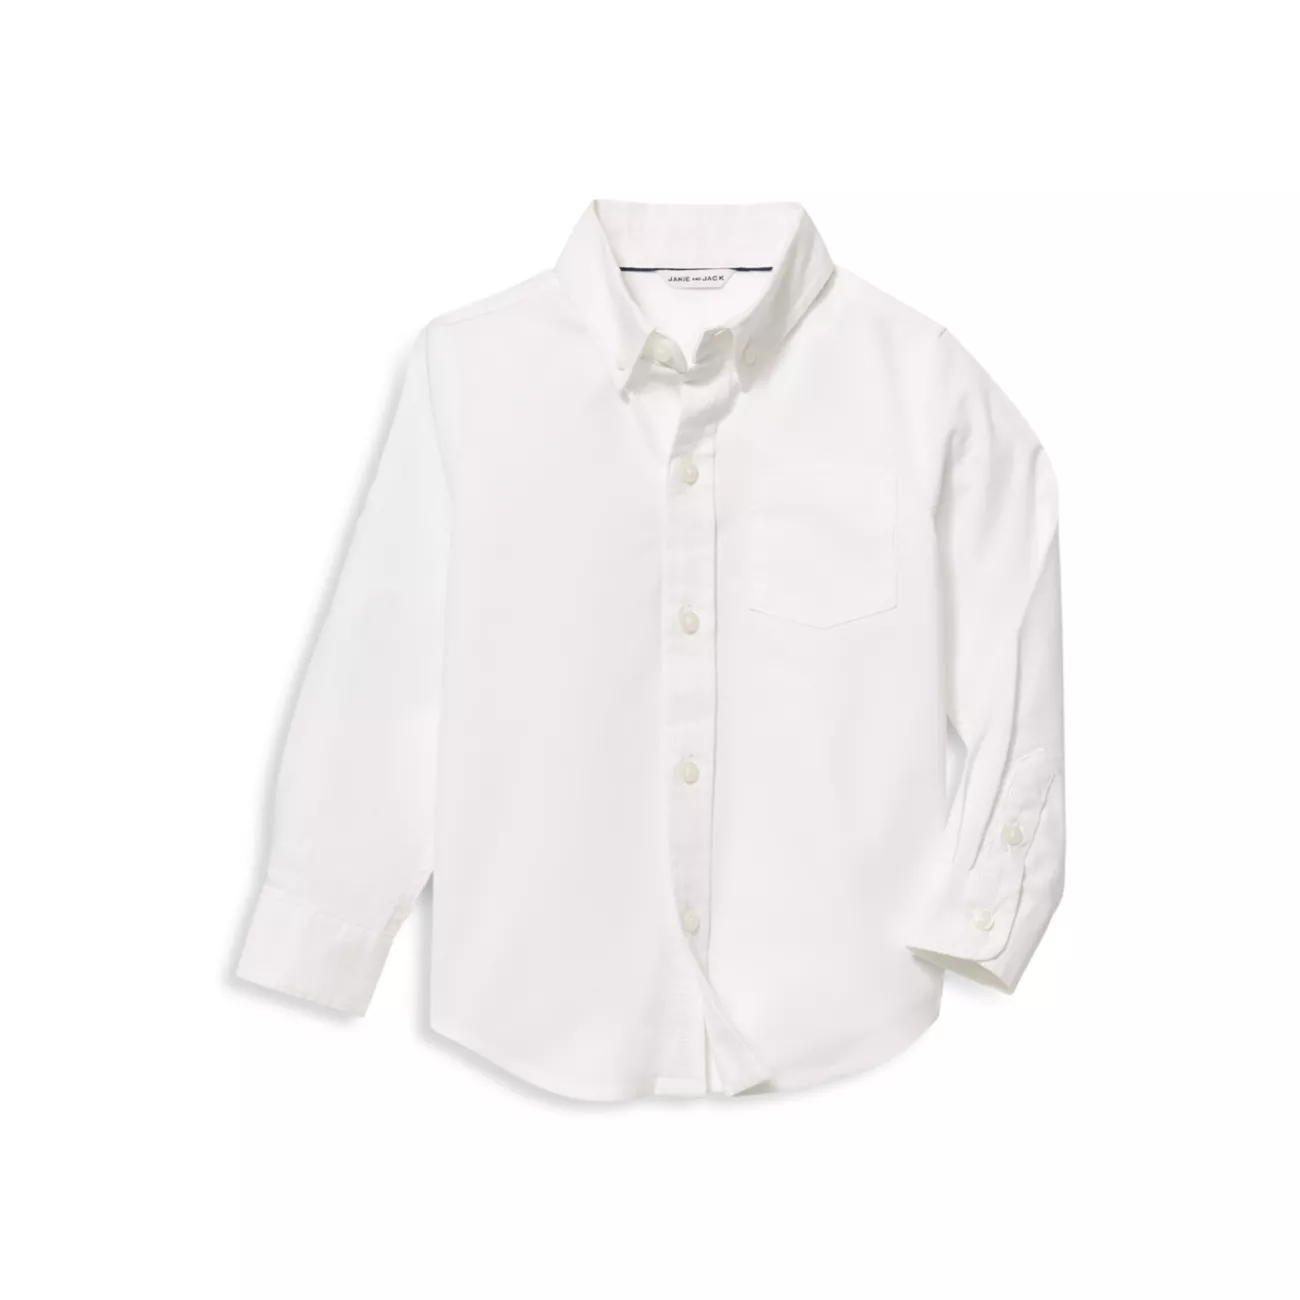 Baby's, Little Boy's &amp; Boy's Cotton Oxford Shirt Janie and Jack